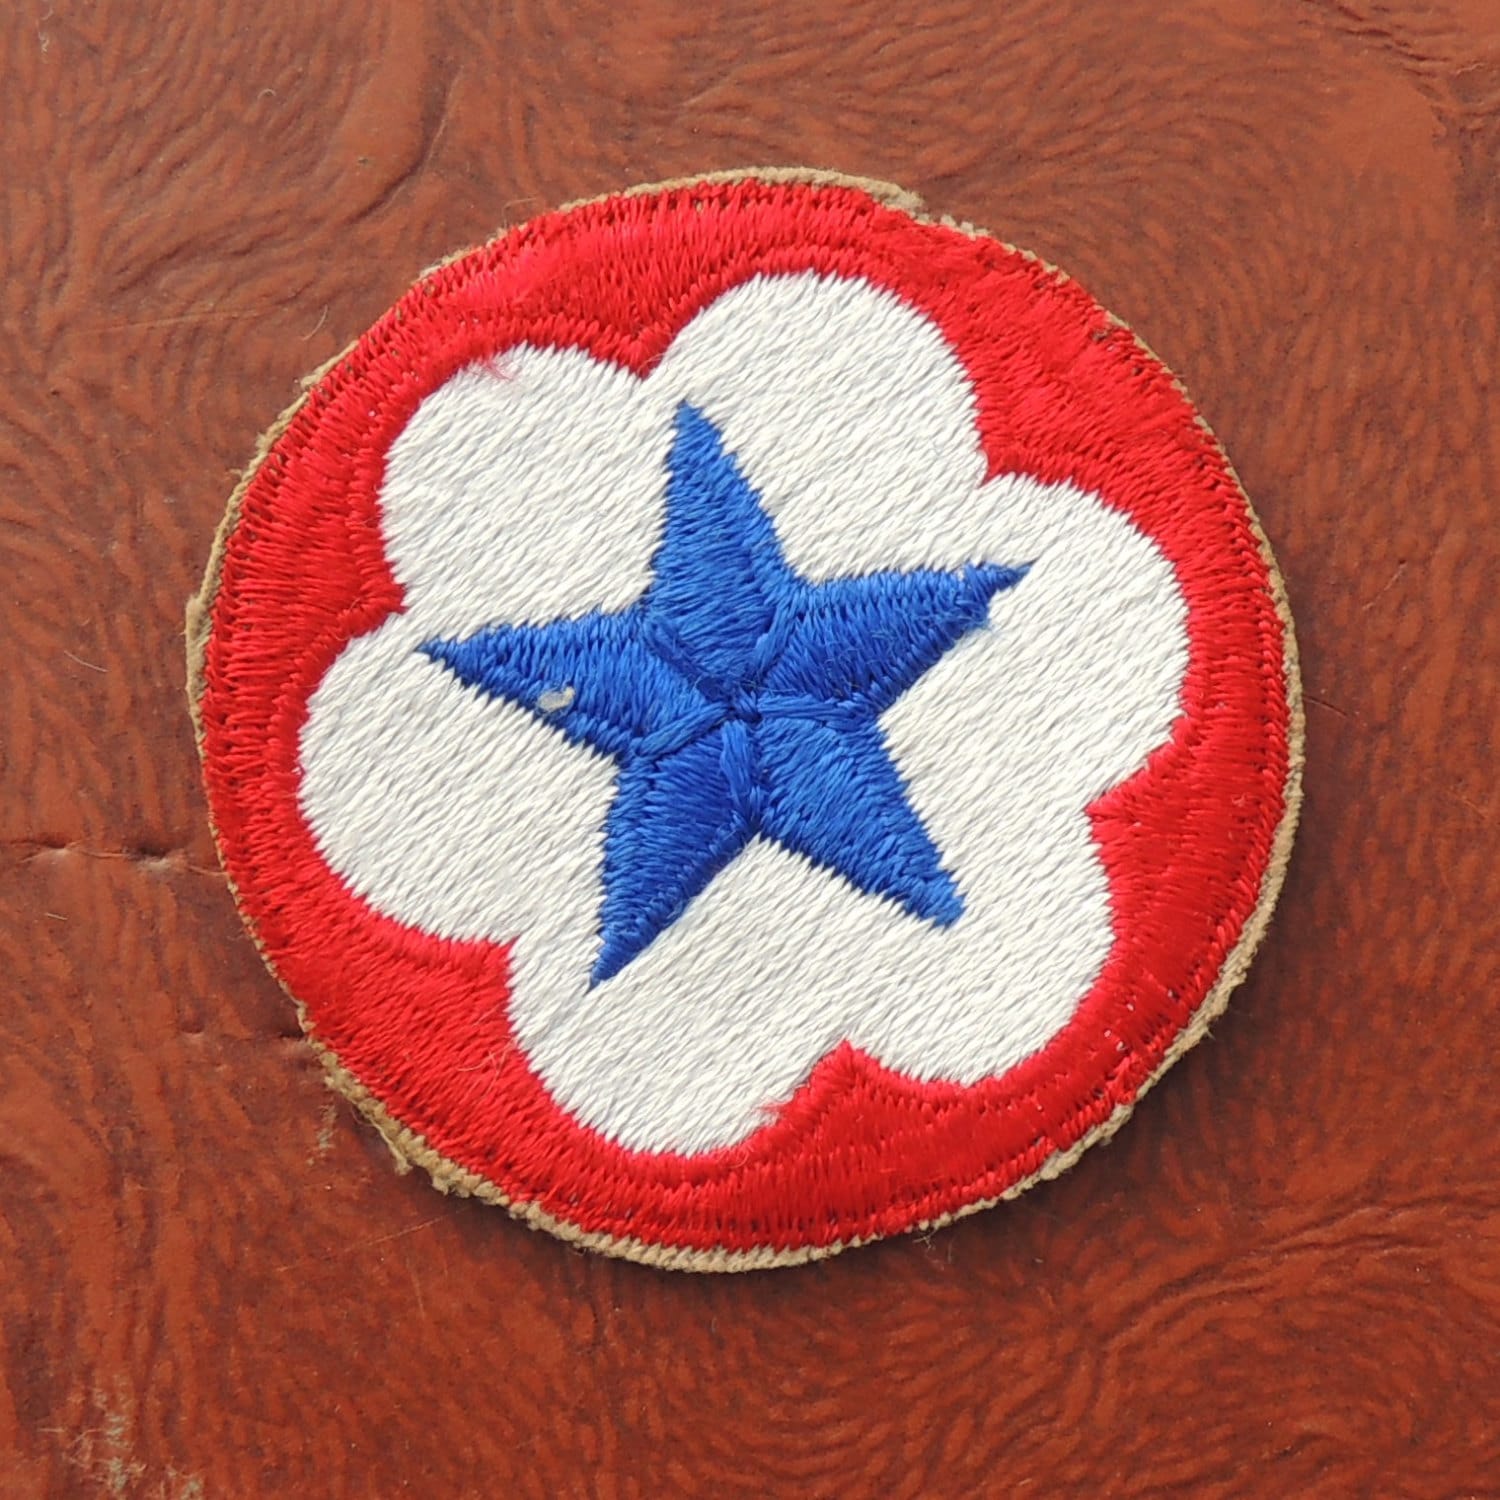 World War 2 Army Patches